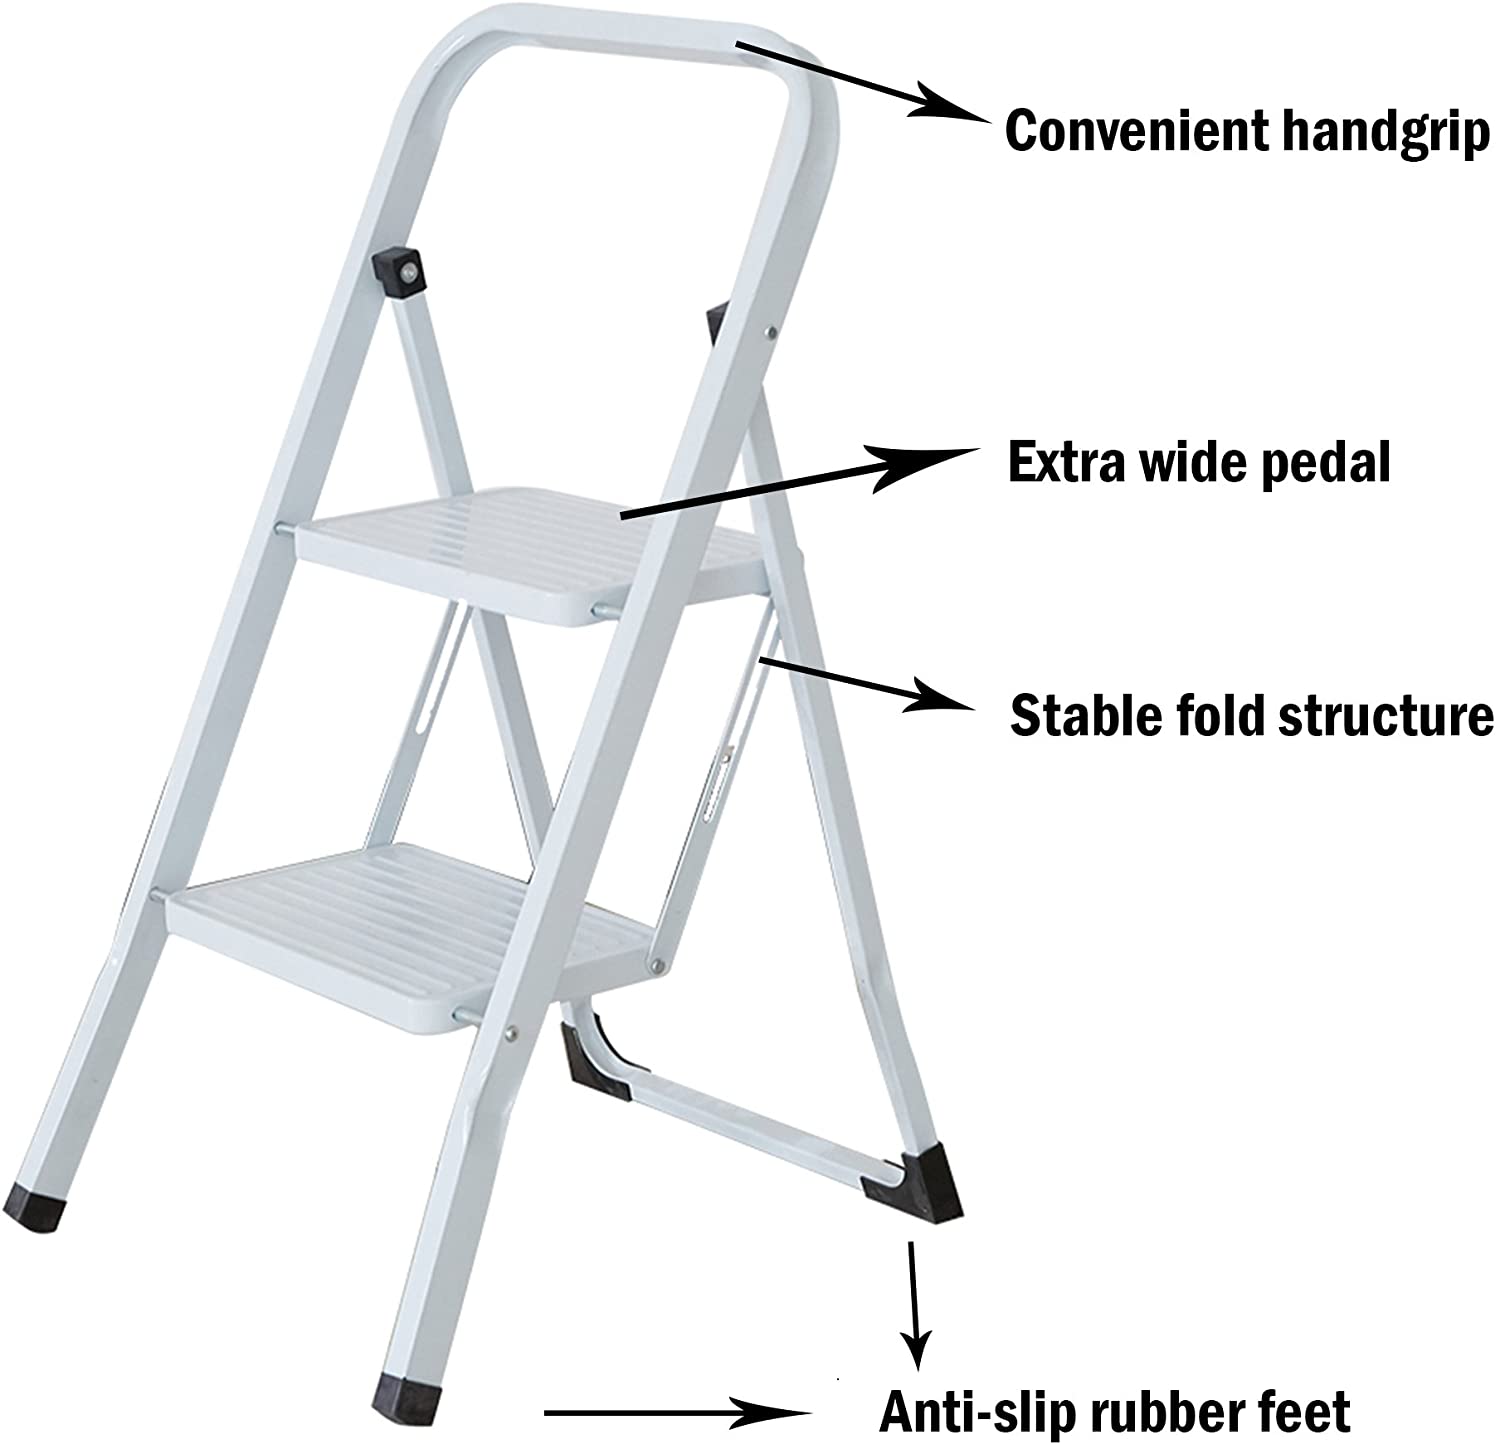 2-Step Step Ladder Folding Step Stool 330lbs Capacity for Adults Home Kitchen Household White